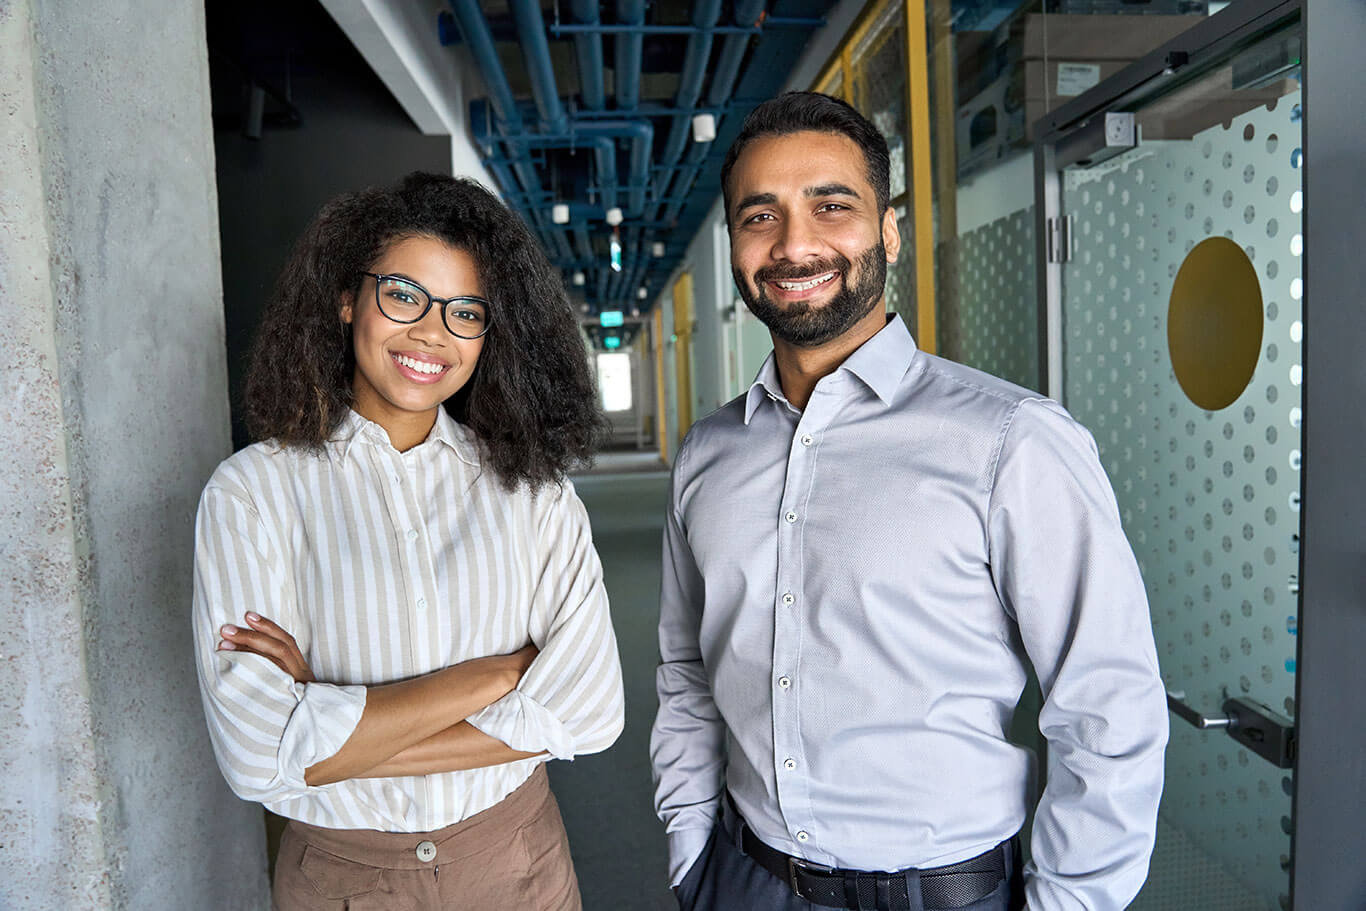 Man and woman in business environment